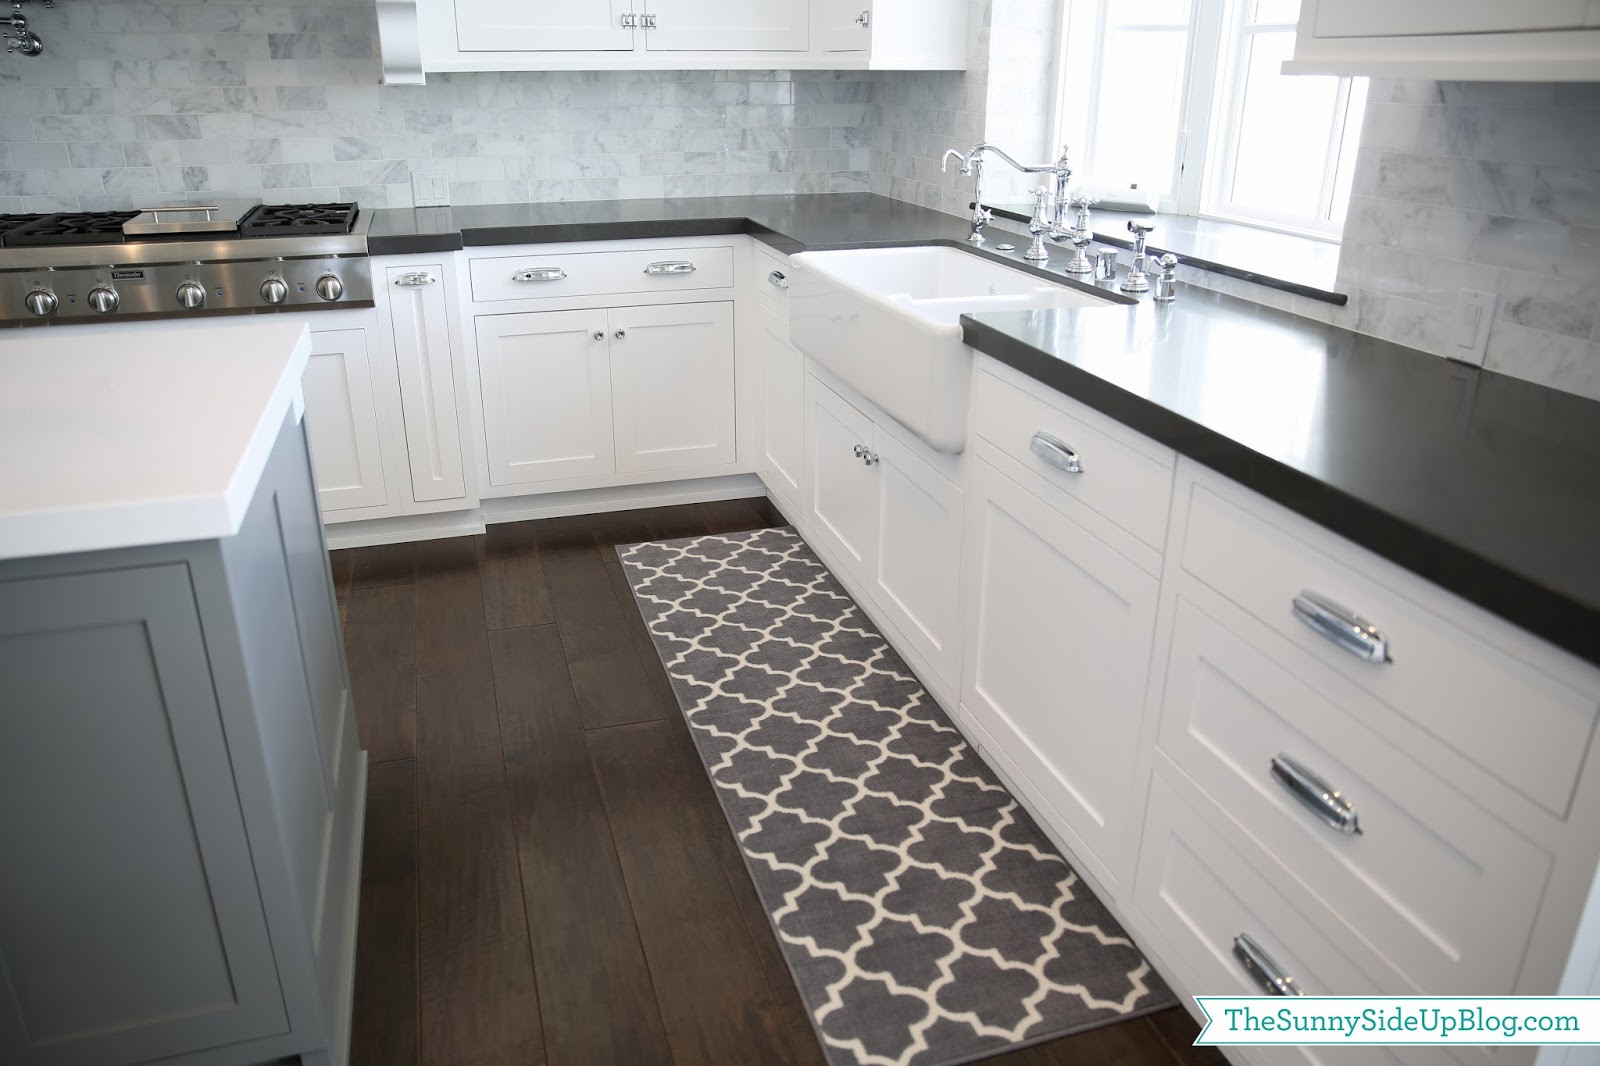 White Kitchen Rugs
 Priorities and new kitchen rugs The Sunny Side Up Blog